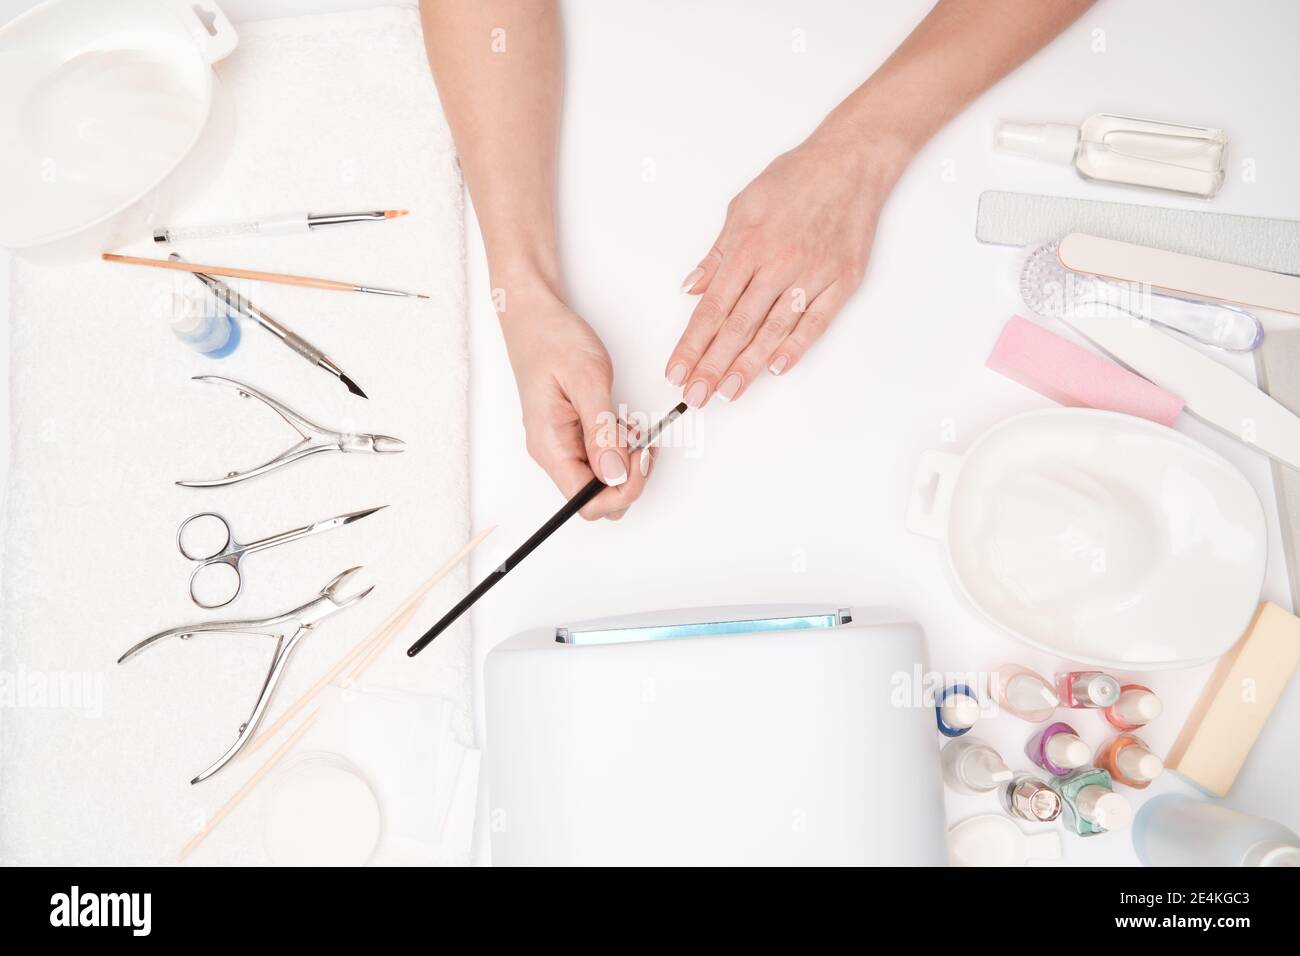 top view of manicure tools and Woman Preparing her hands for getting manicure procedure Stock Photo